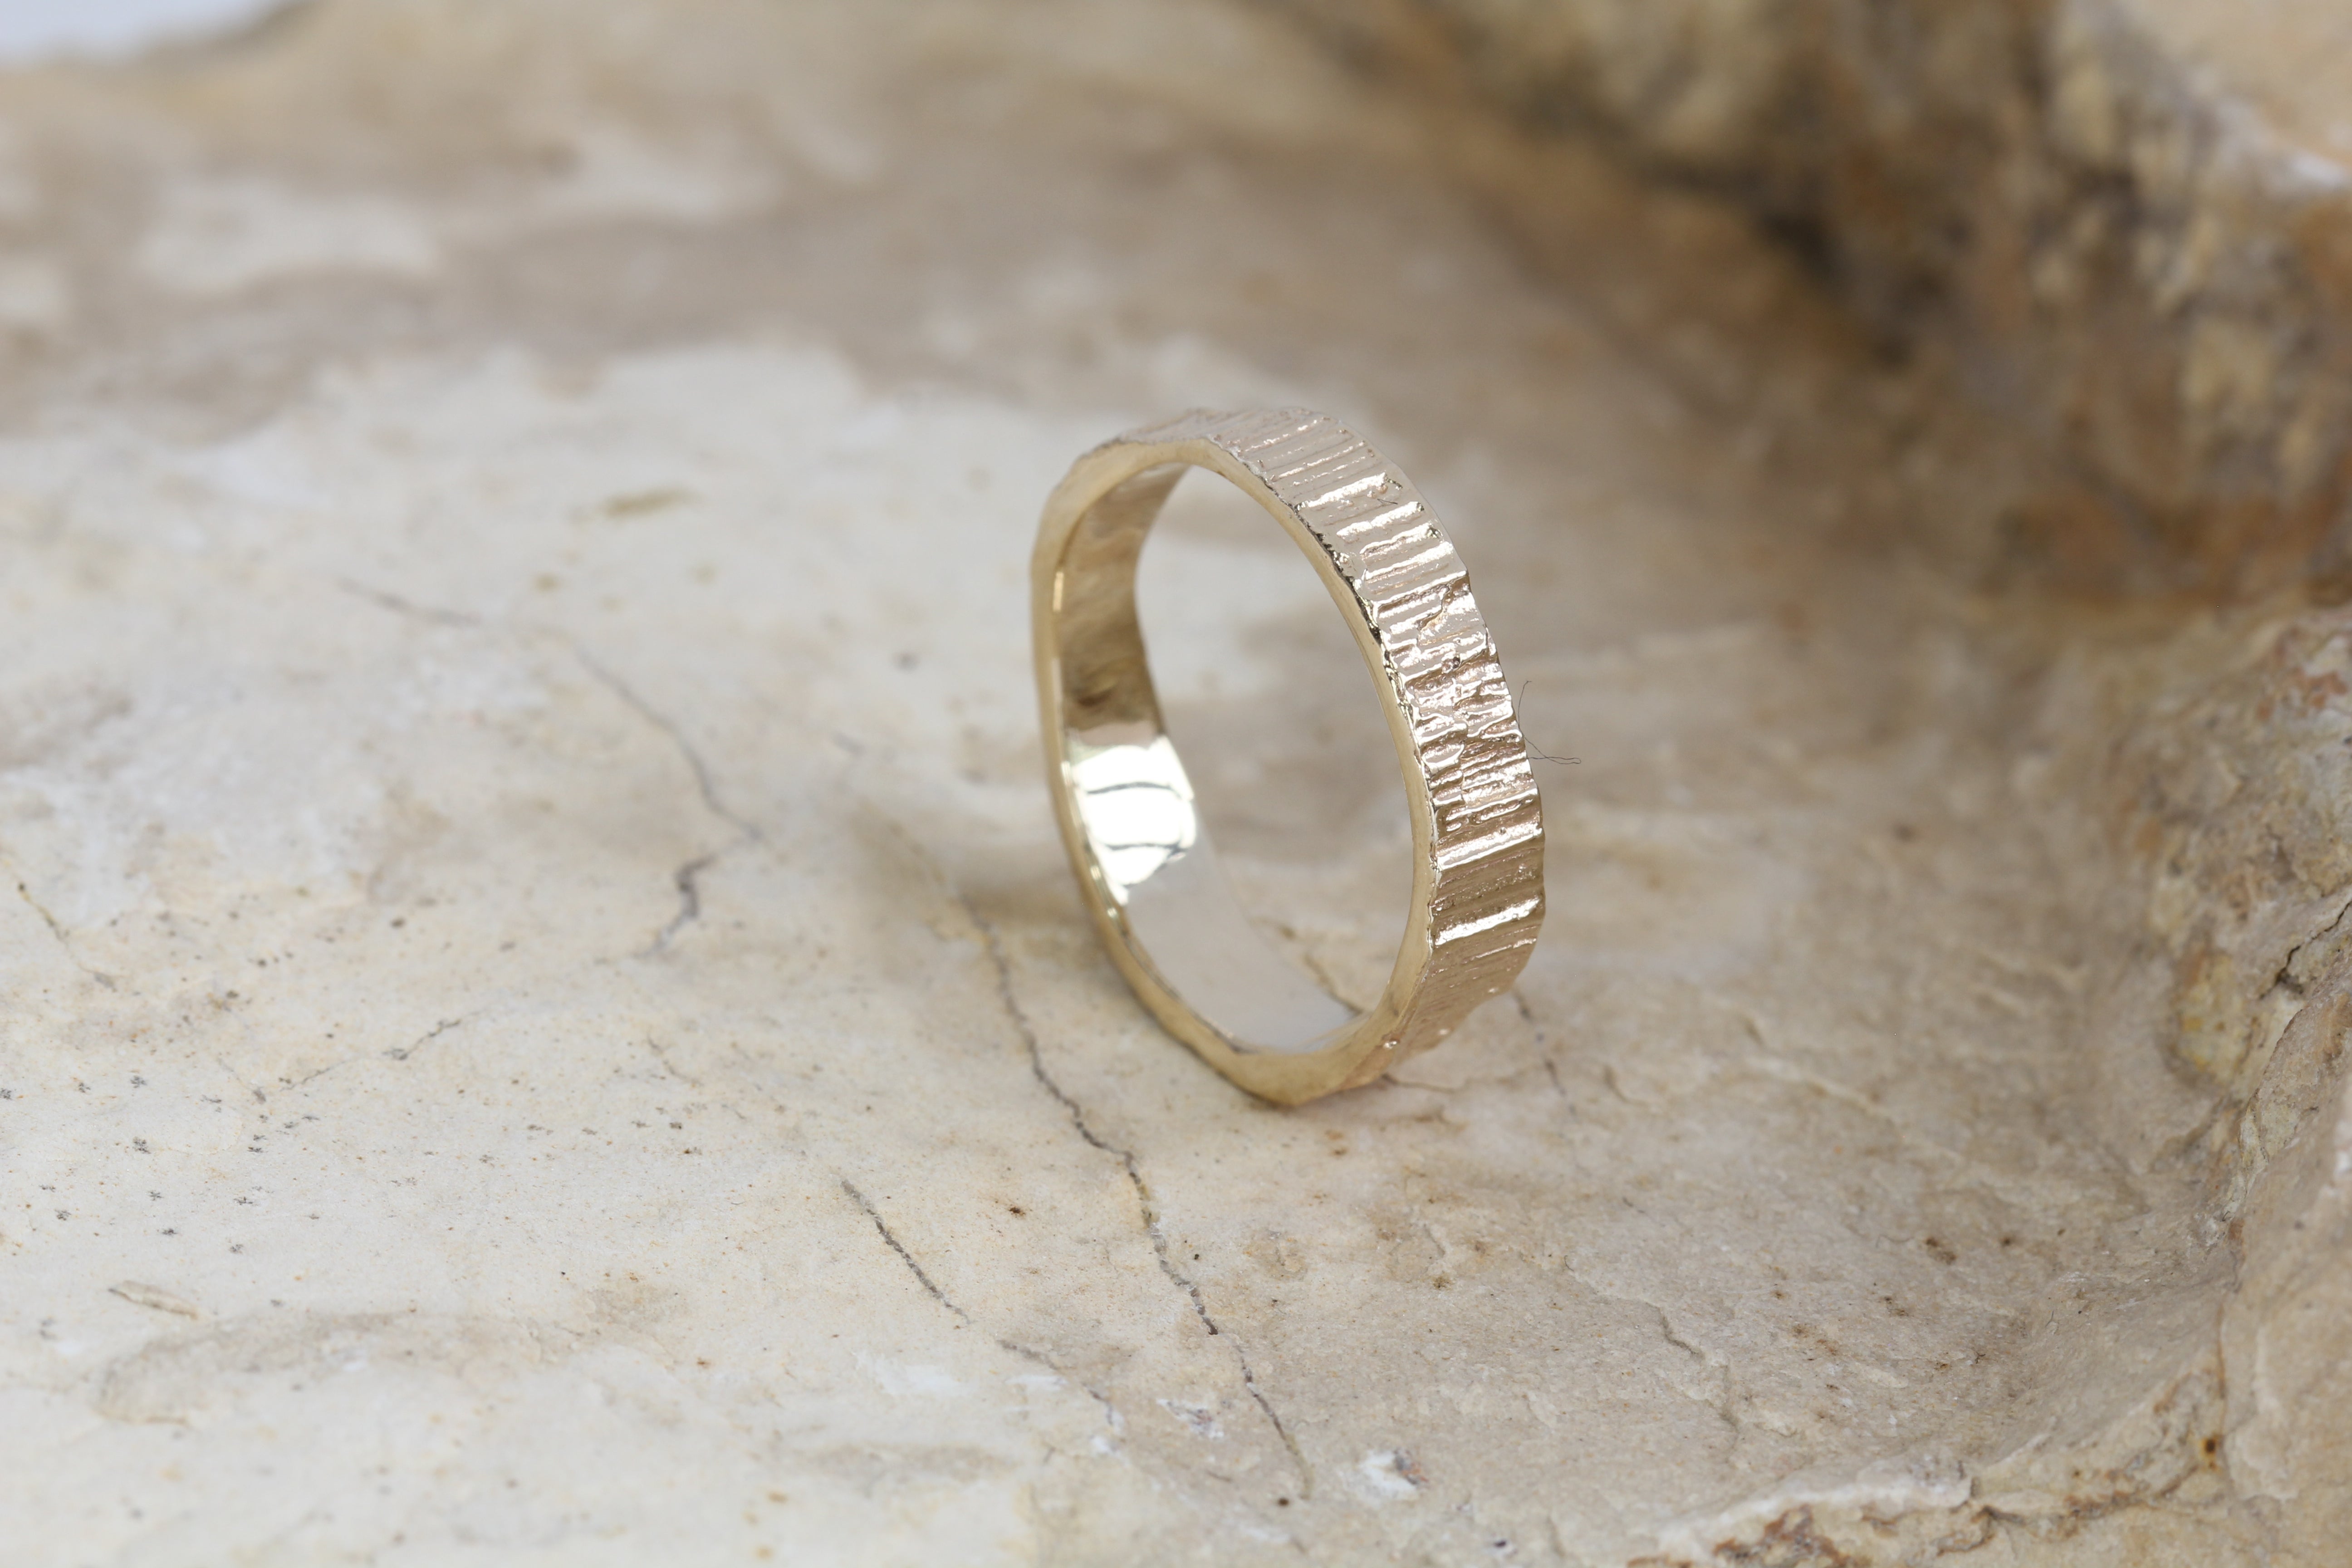 A gold ring standing on a rock. Alternative wedding band with organic textures and smooth polished inside.. Handmade by Irish jeweller Eily O Connell.